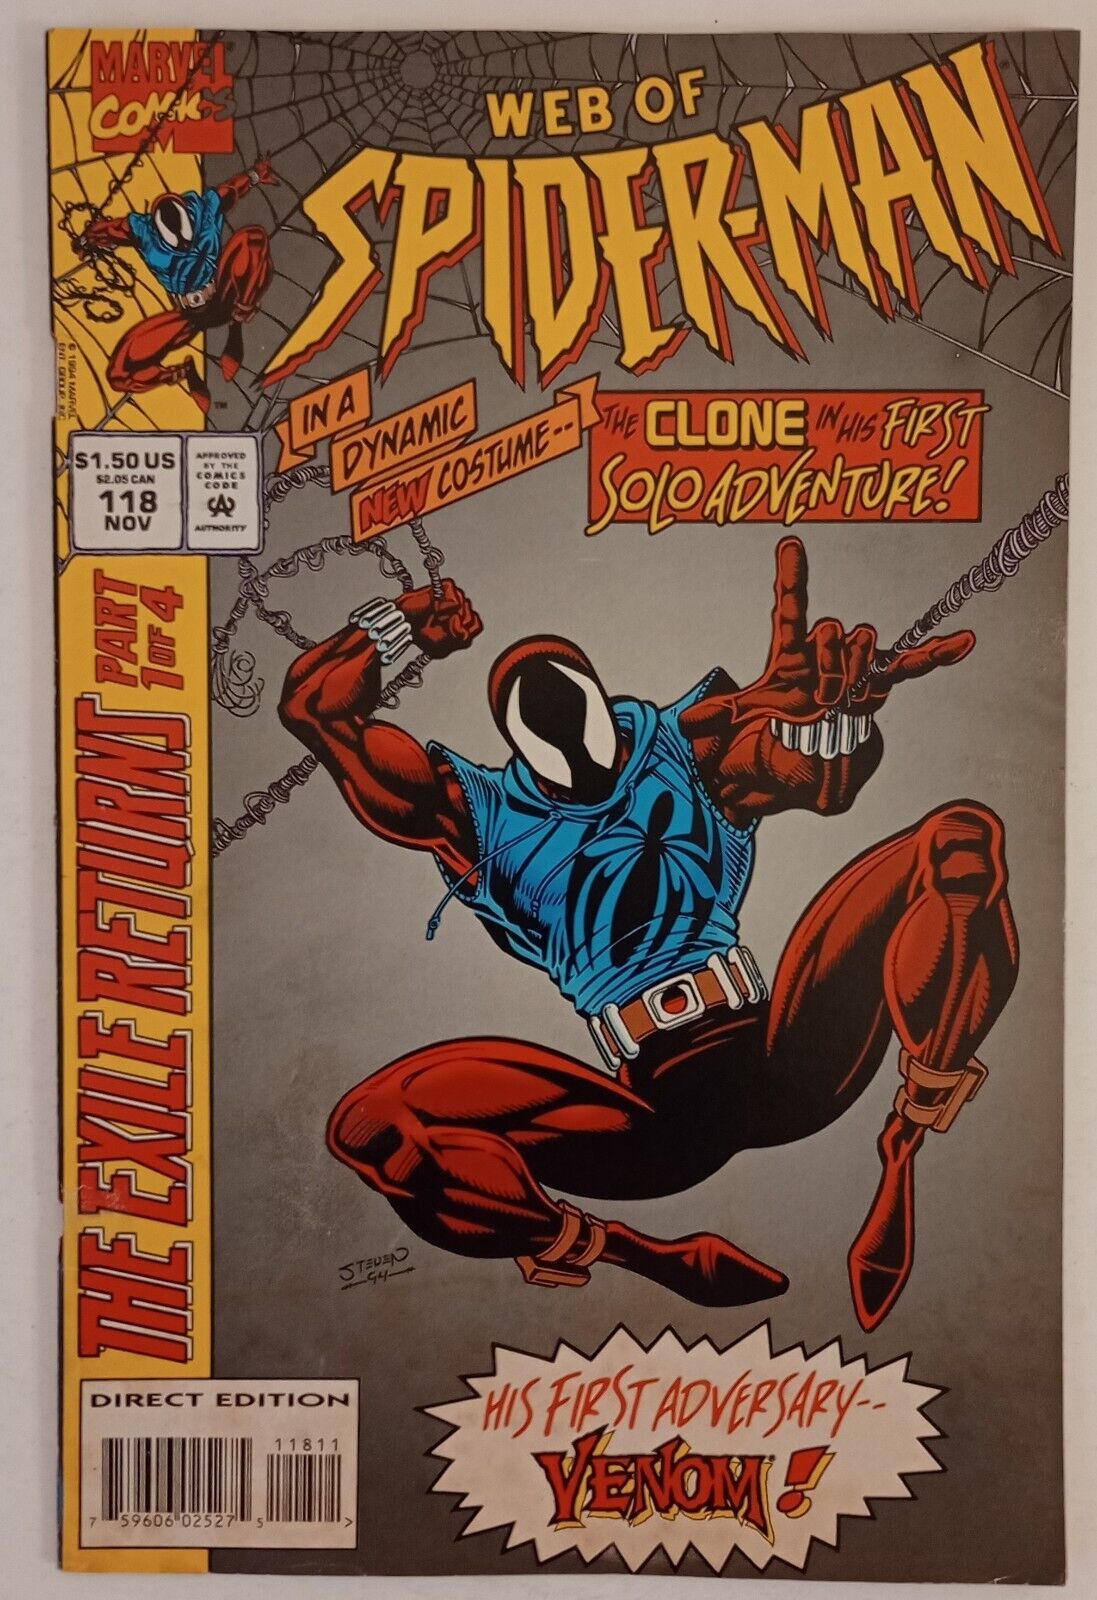 Web of Spider-Man #118 (1st app of Ben Riley as The Scarlet Spider) \